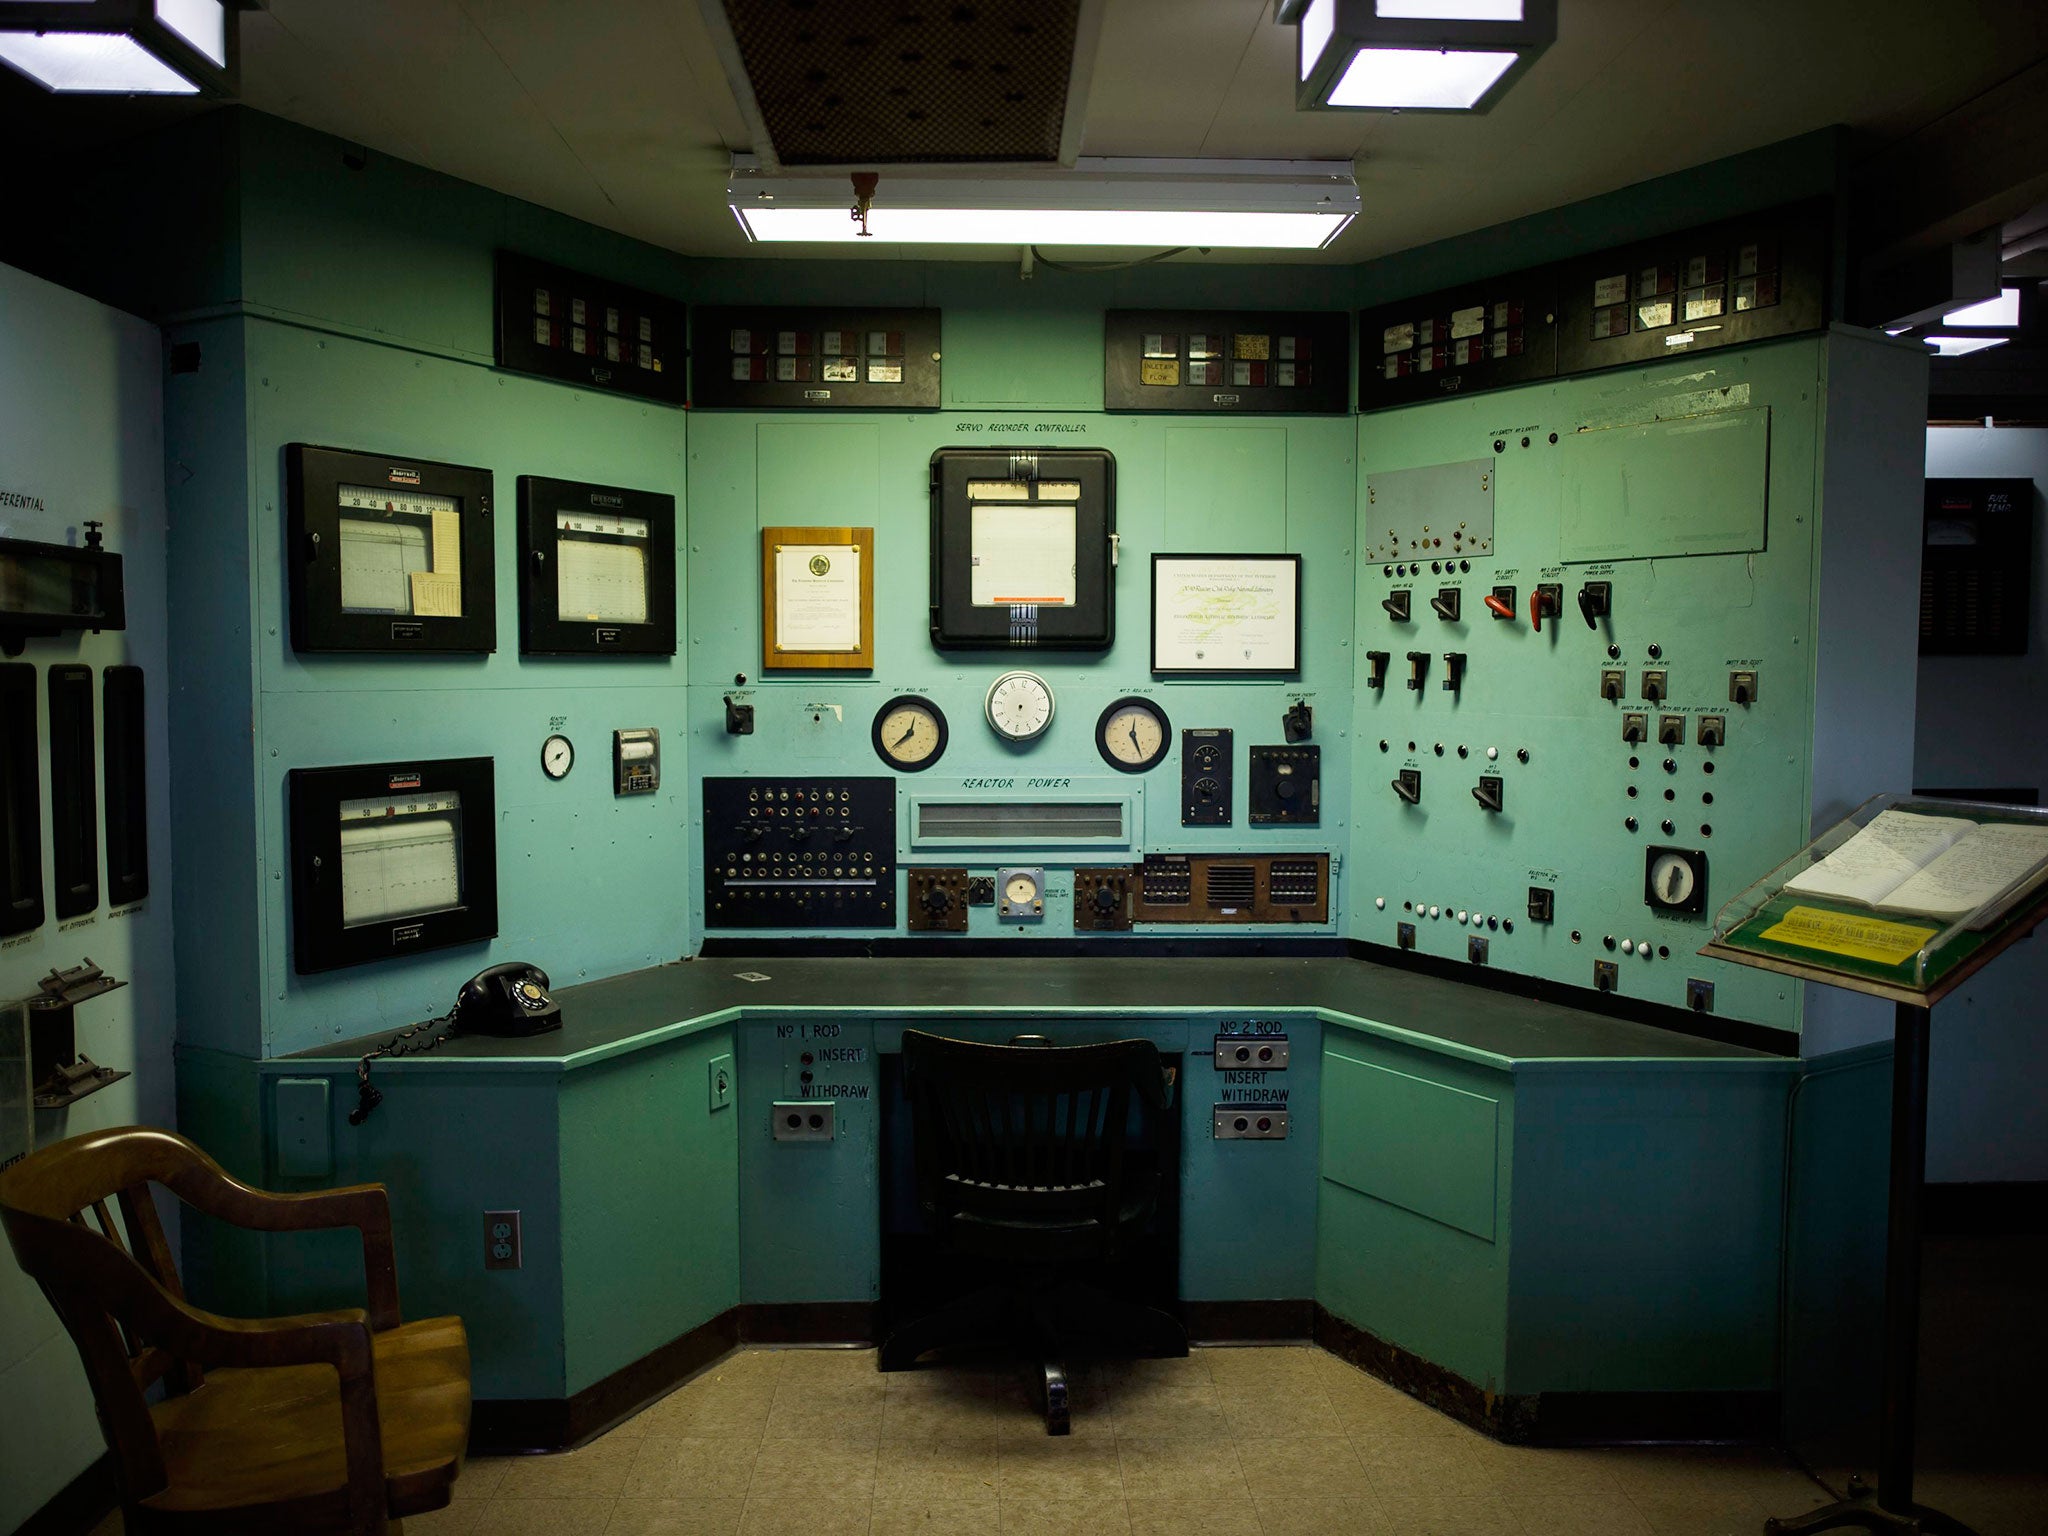 The control room of the X-10 graphite reactor, the world's second reactor after Enrico Fermi's so-called Chicago Pile, is seen at Oak Ridge National Laboratory in Oak Ridge, Tennessee